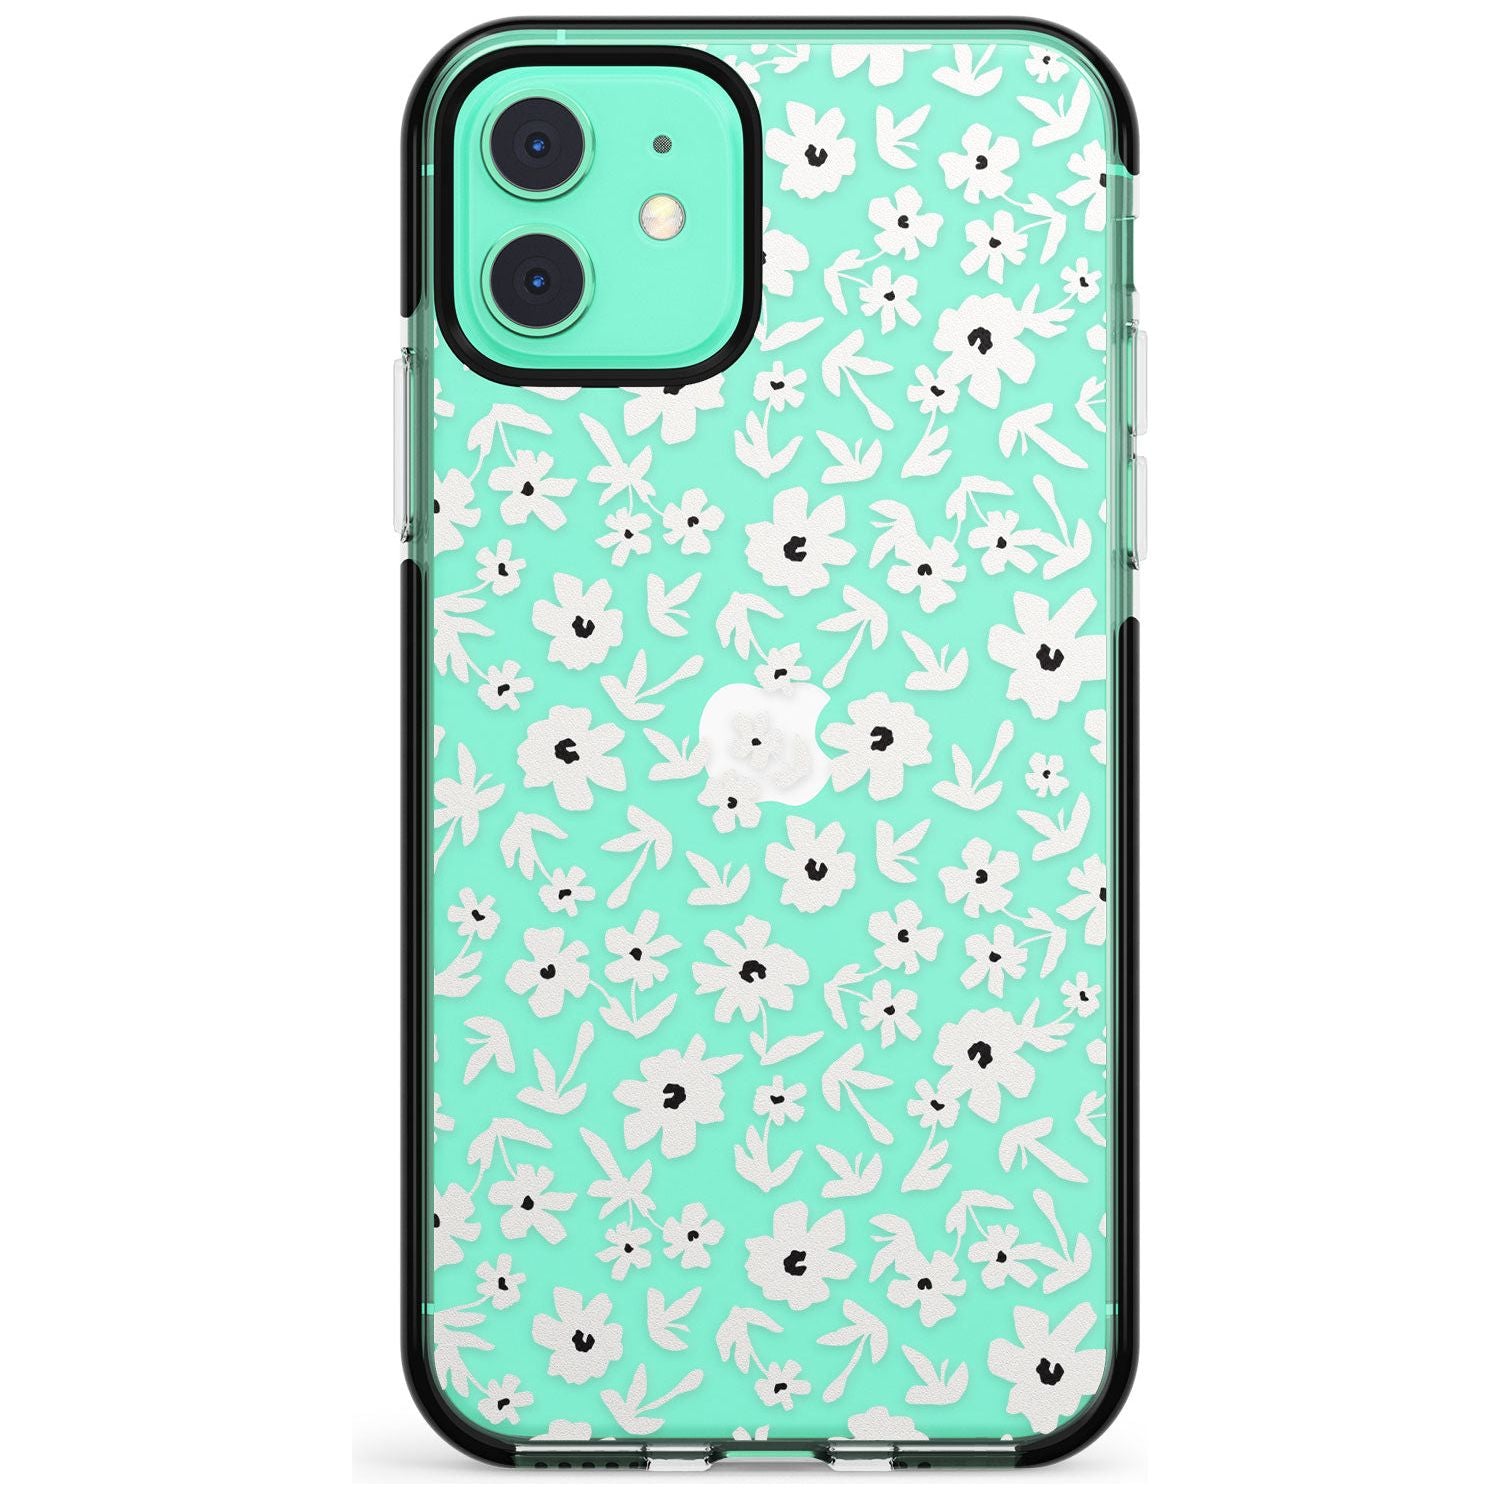 Floral Print on Clear - Cute Floral Design Pink Fade Impact Phone Case for iPhone 11 Pro Max